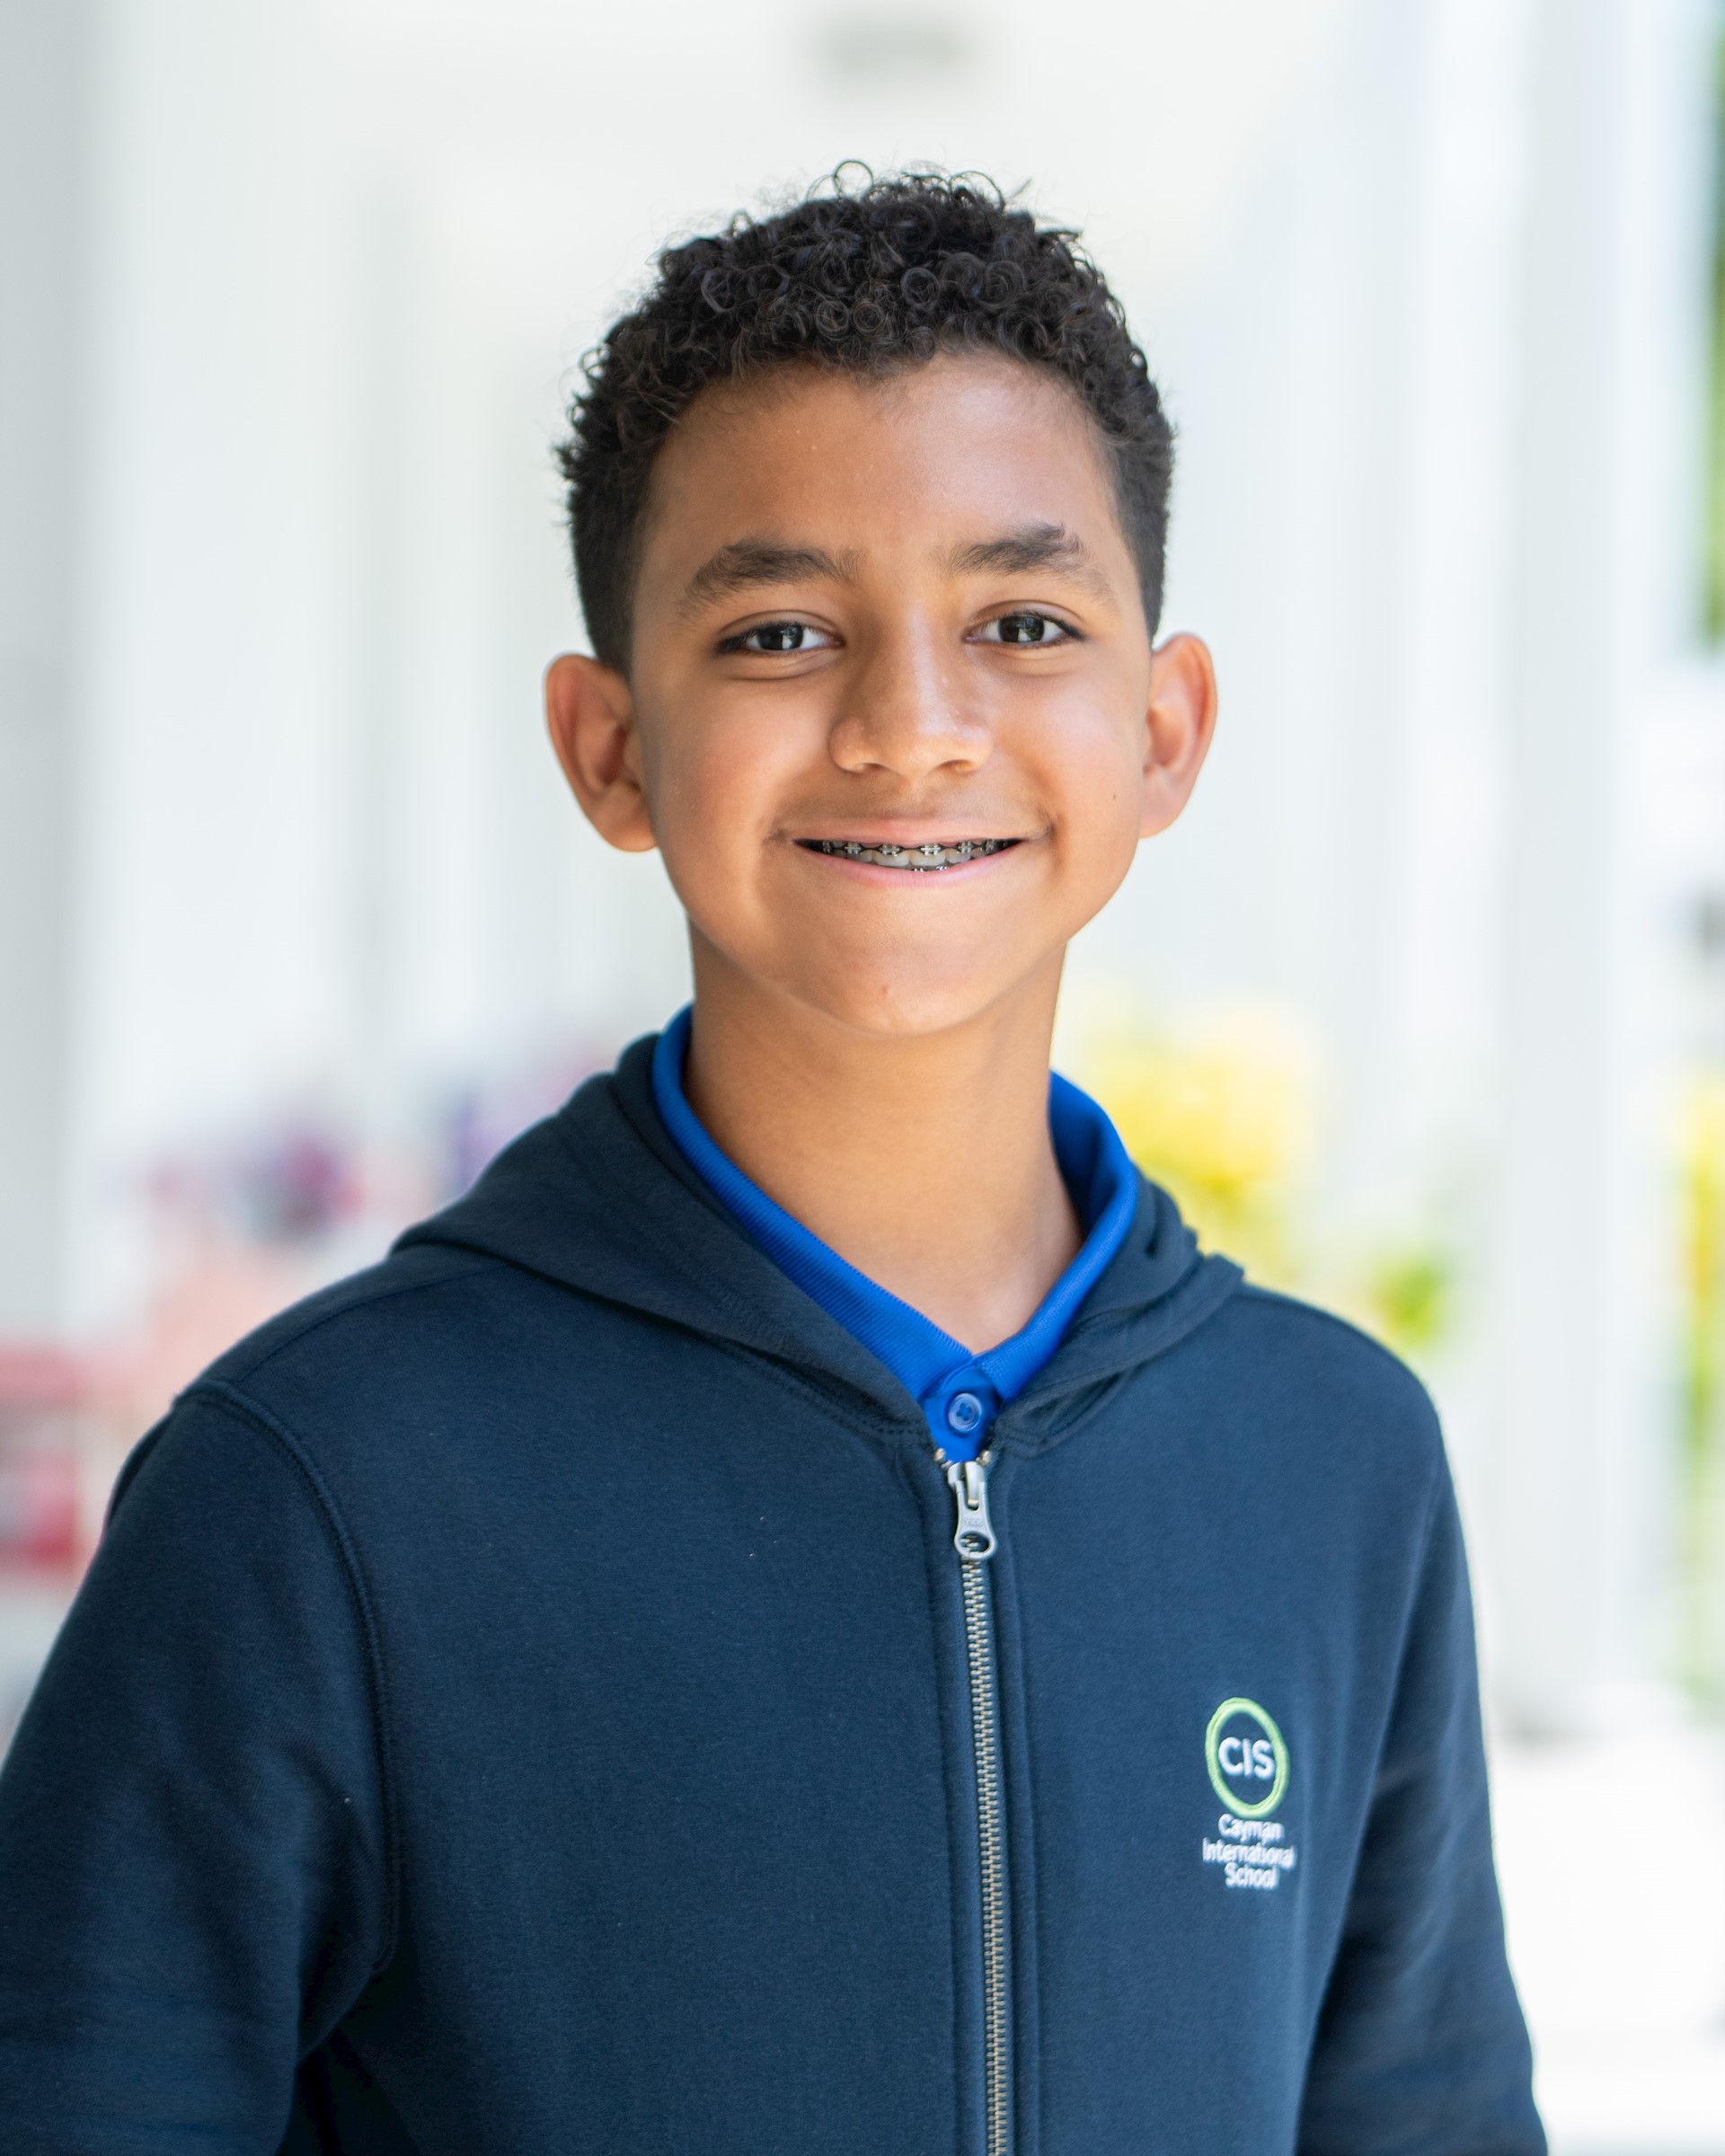 Pre-teen boy with brown skin and black hair, wearing a navy sweater, smiles at the camera.